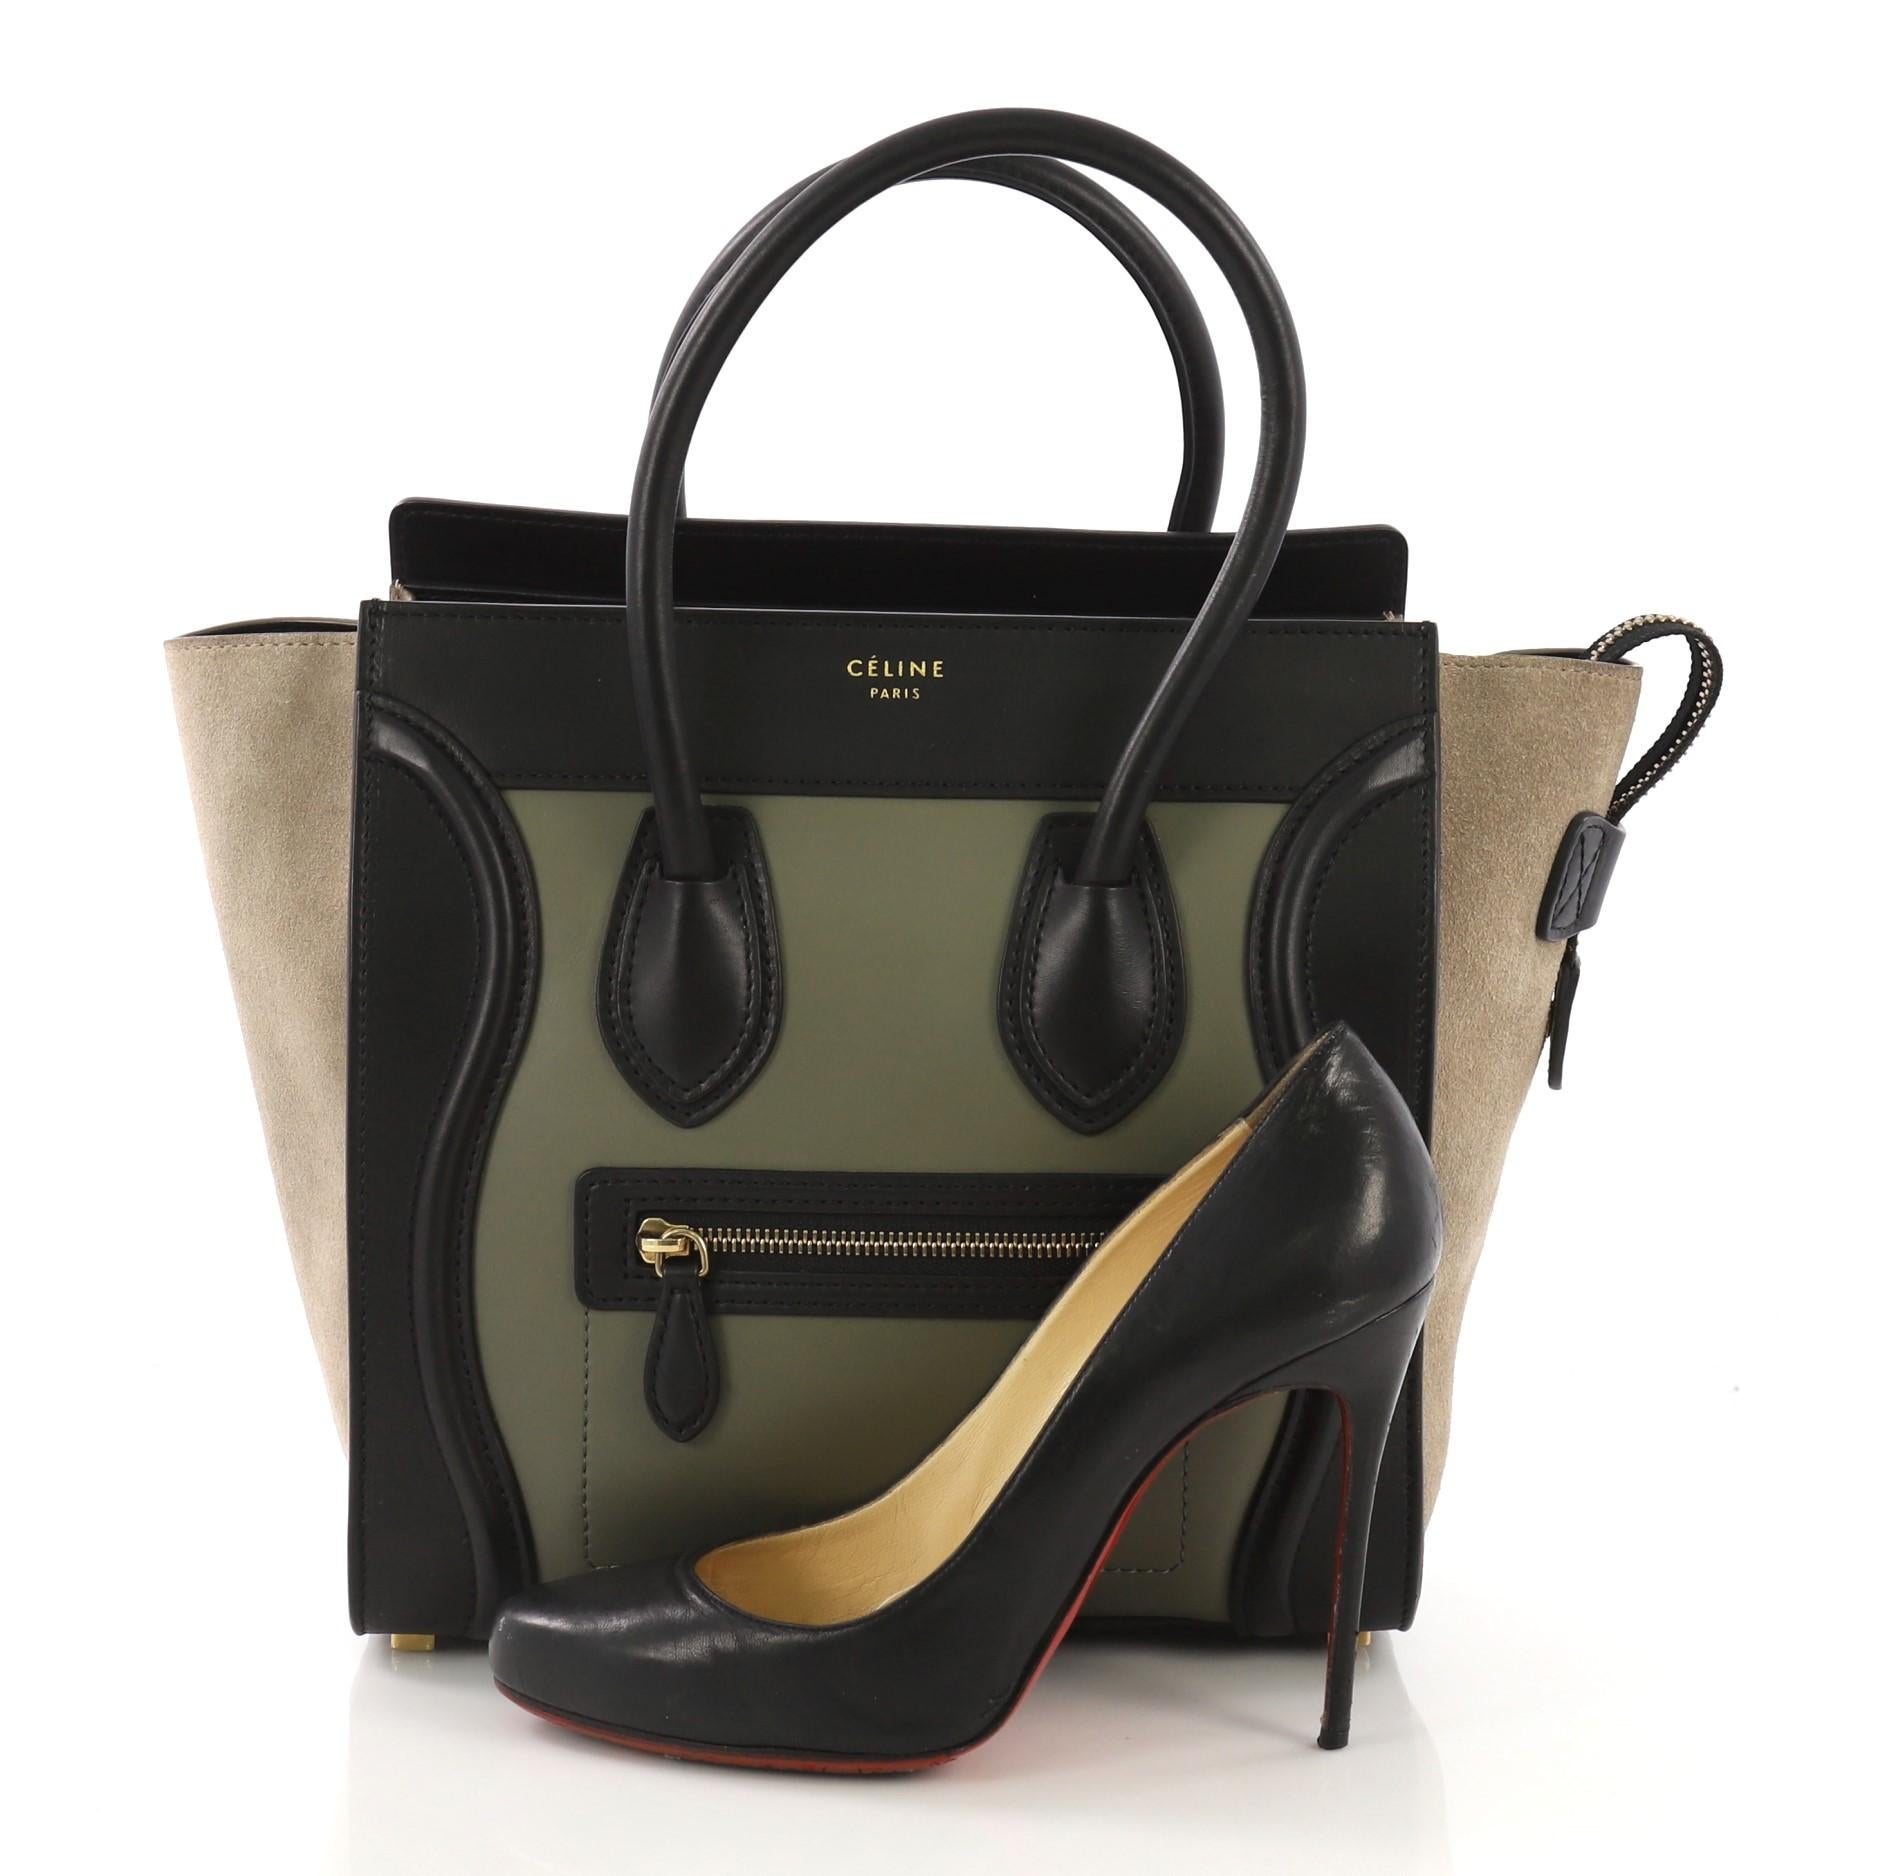 This Celine Tricolor Luggage Handbag Leather Micro, crafted in green and black leather and gray suede, features a front zip pocket, dual rolled leather handles, and gold-tone hardware. Its zip closure opens to a black leather interior with zip and